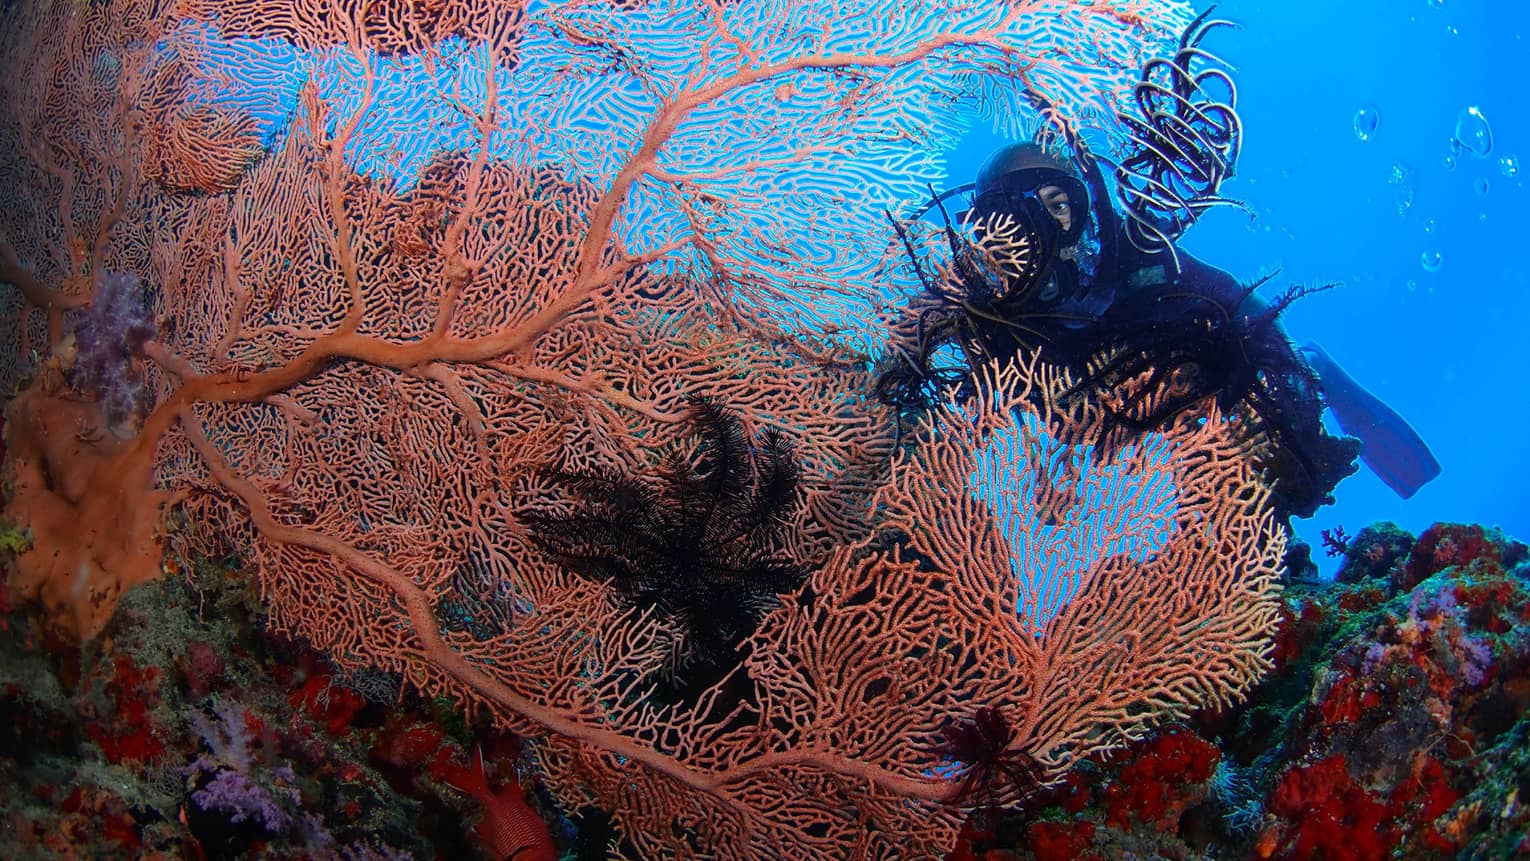 A Scuba diver swims behind large, colourful coral in lagoon